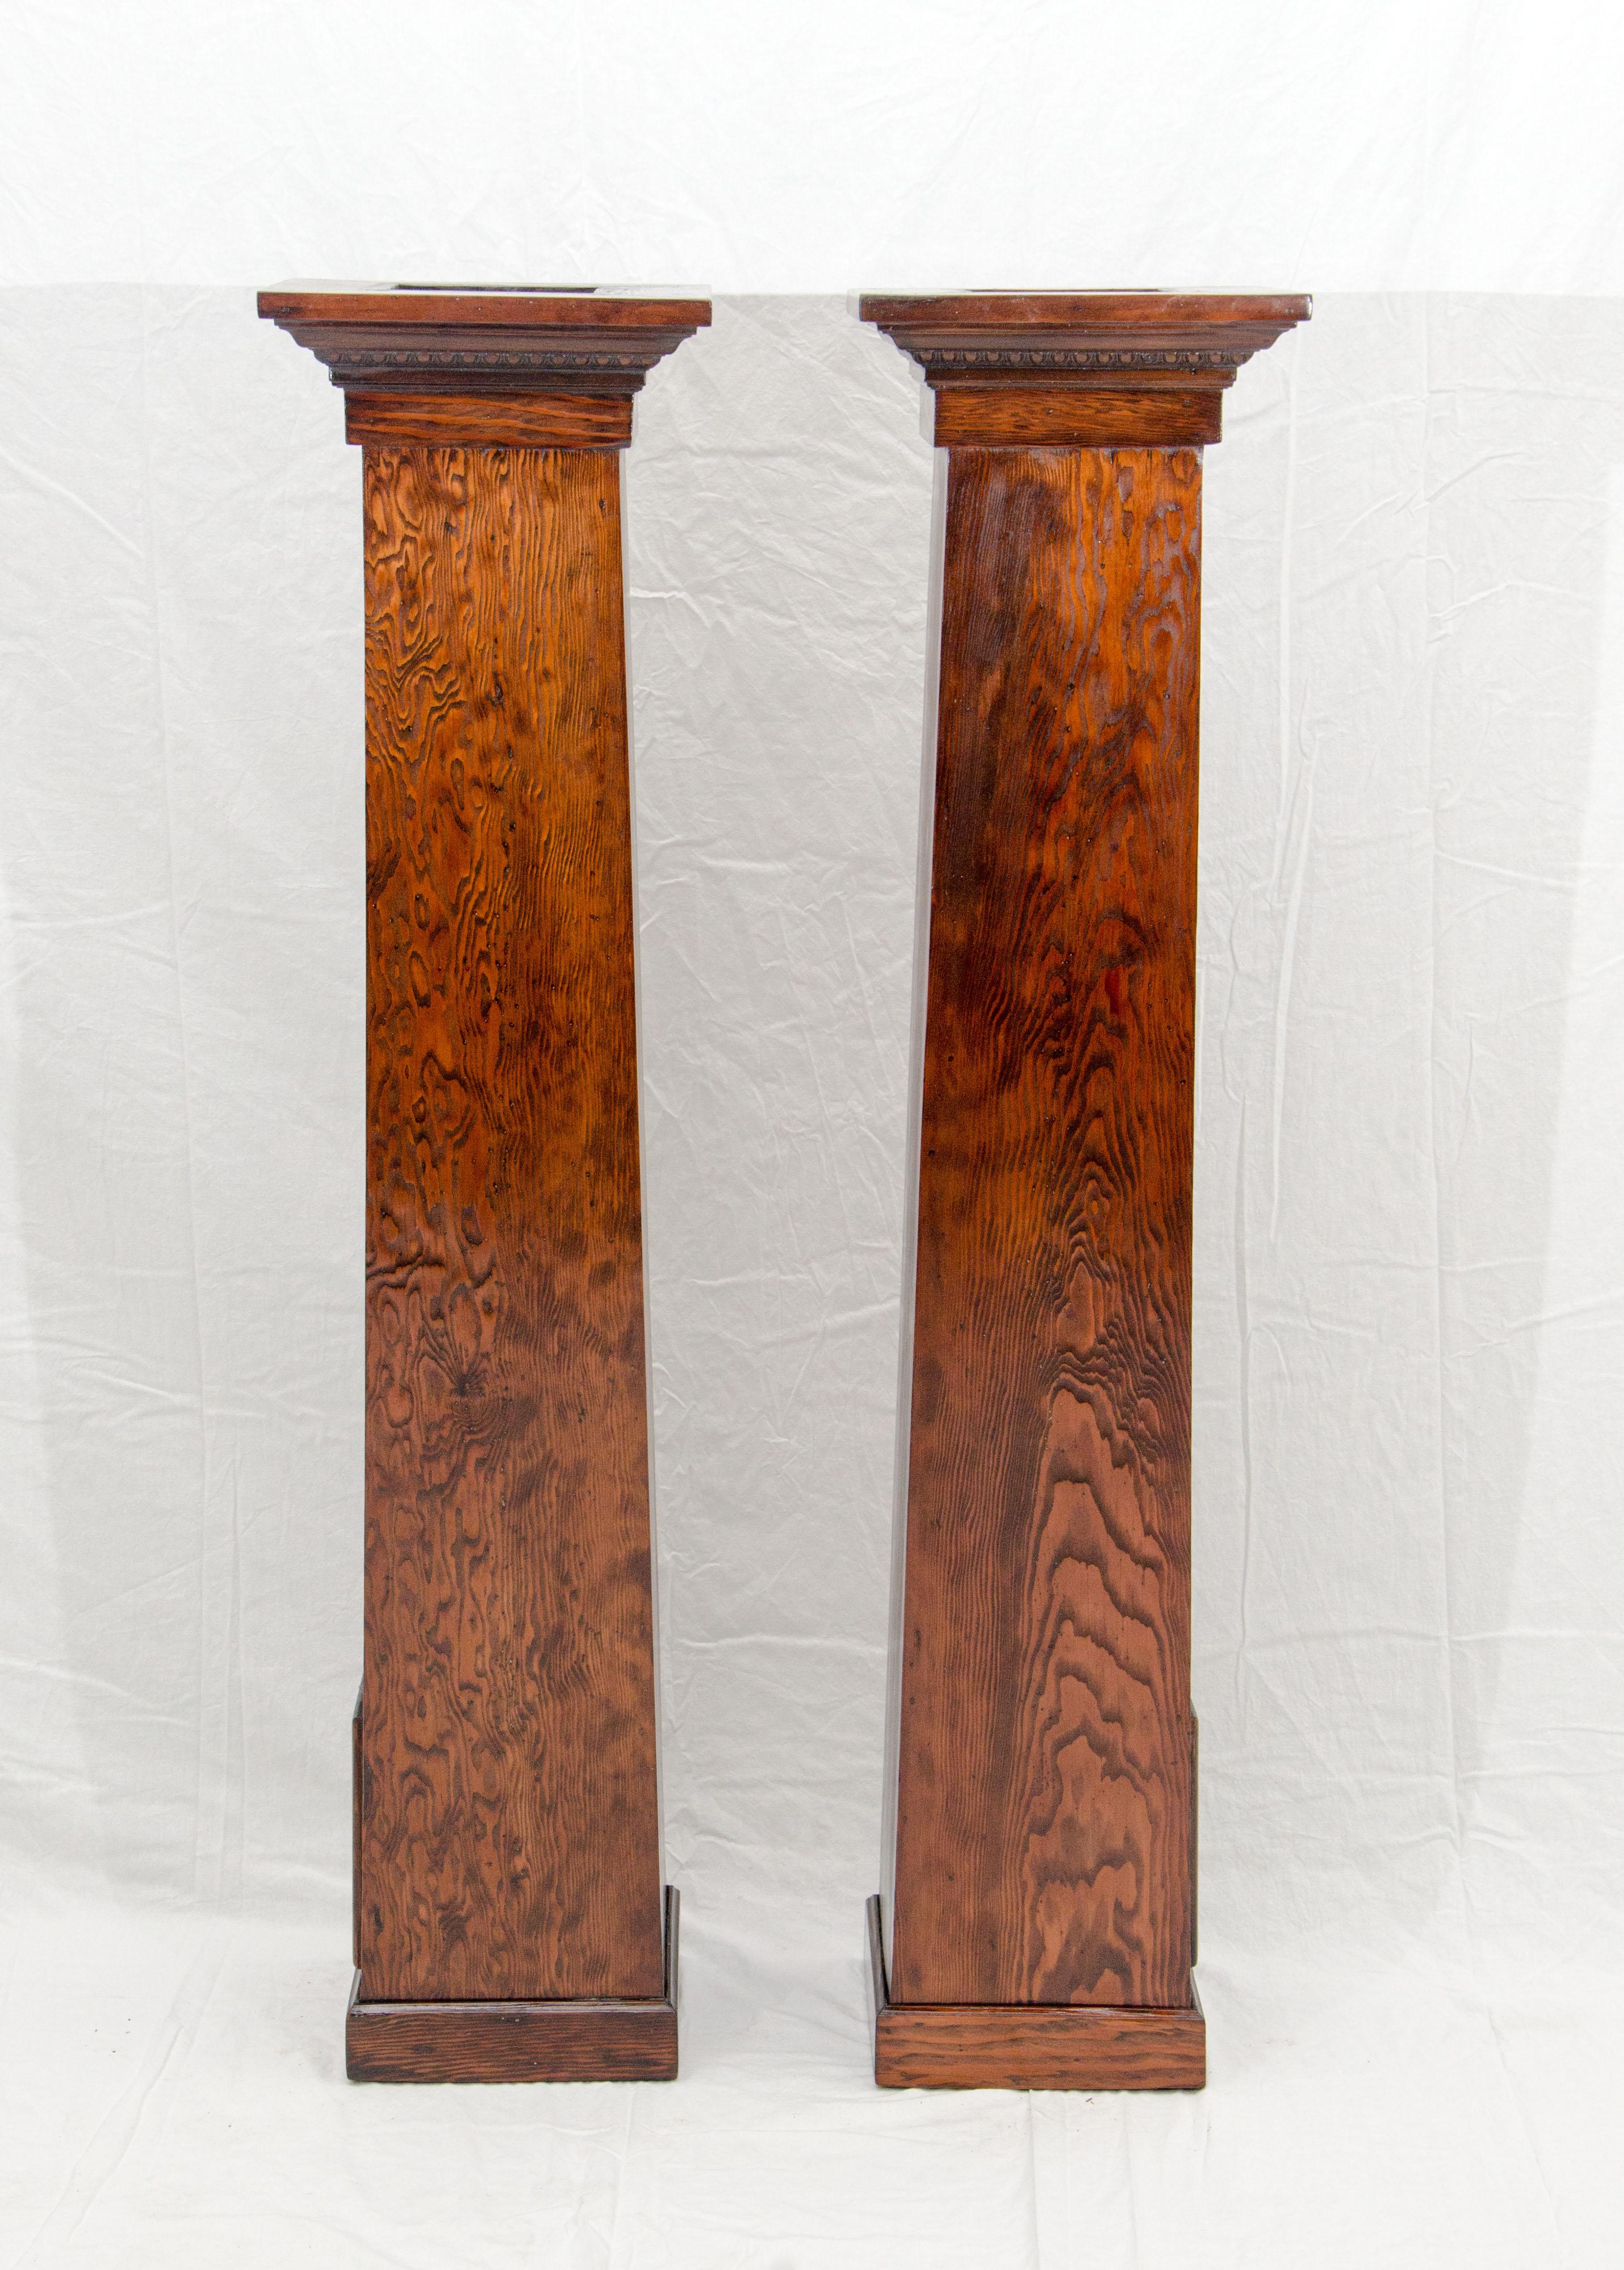 American Pair of Fir Arts & Crafts Architectural Columns or Plant Stands